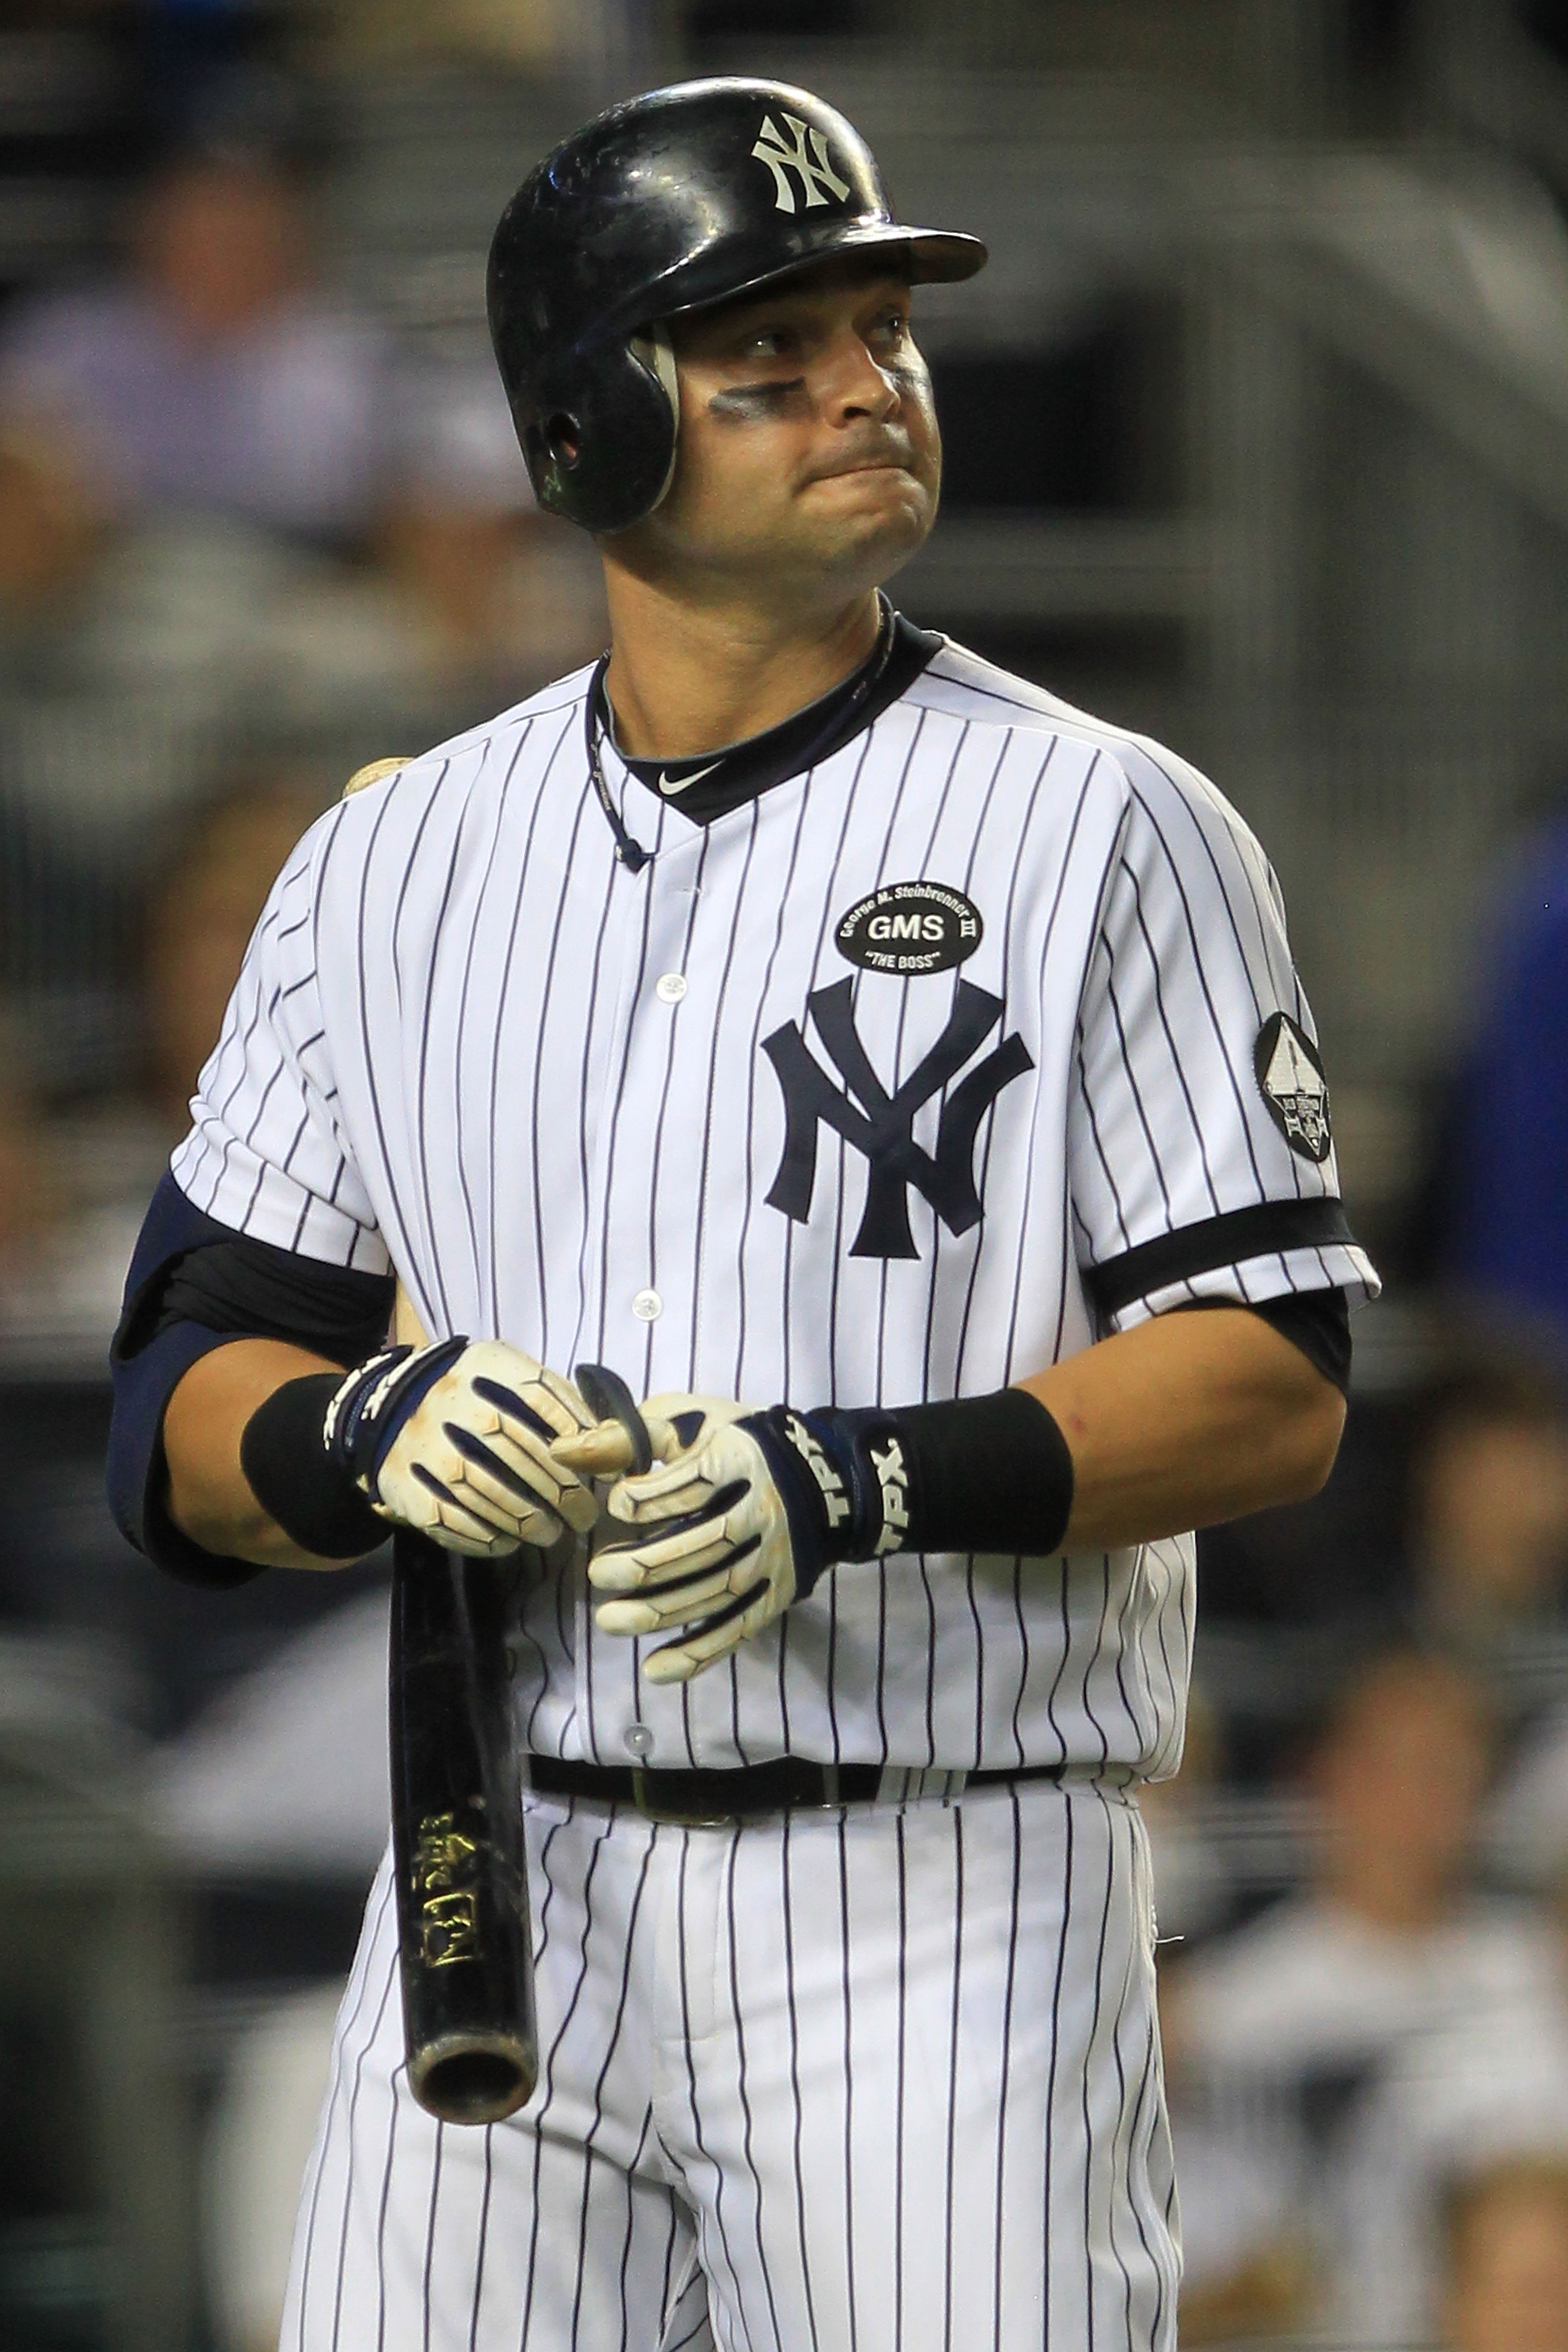 Nick Swisher traded to the White Sox